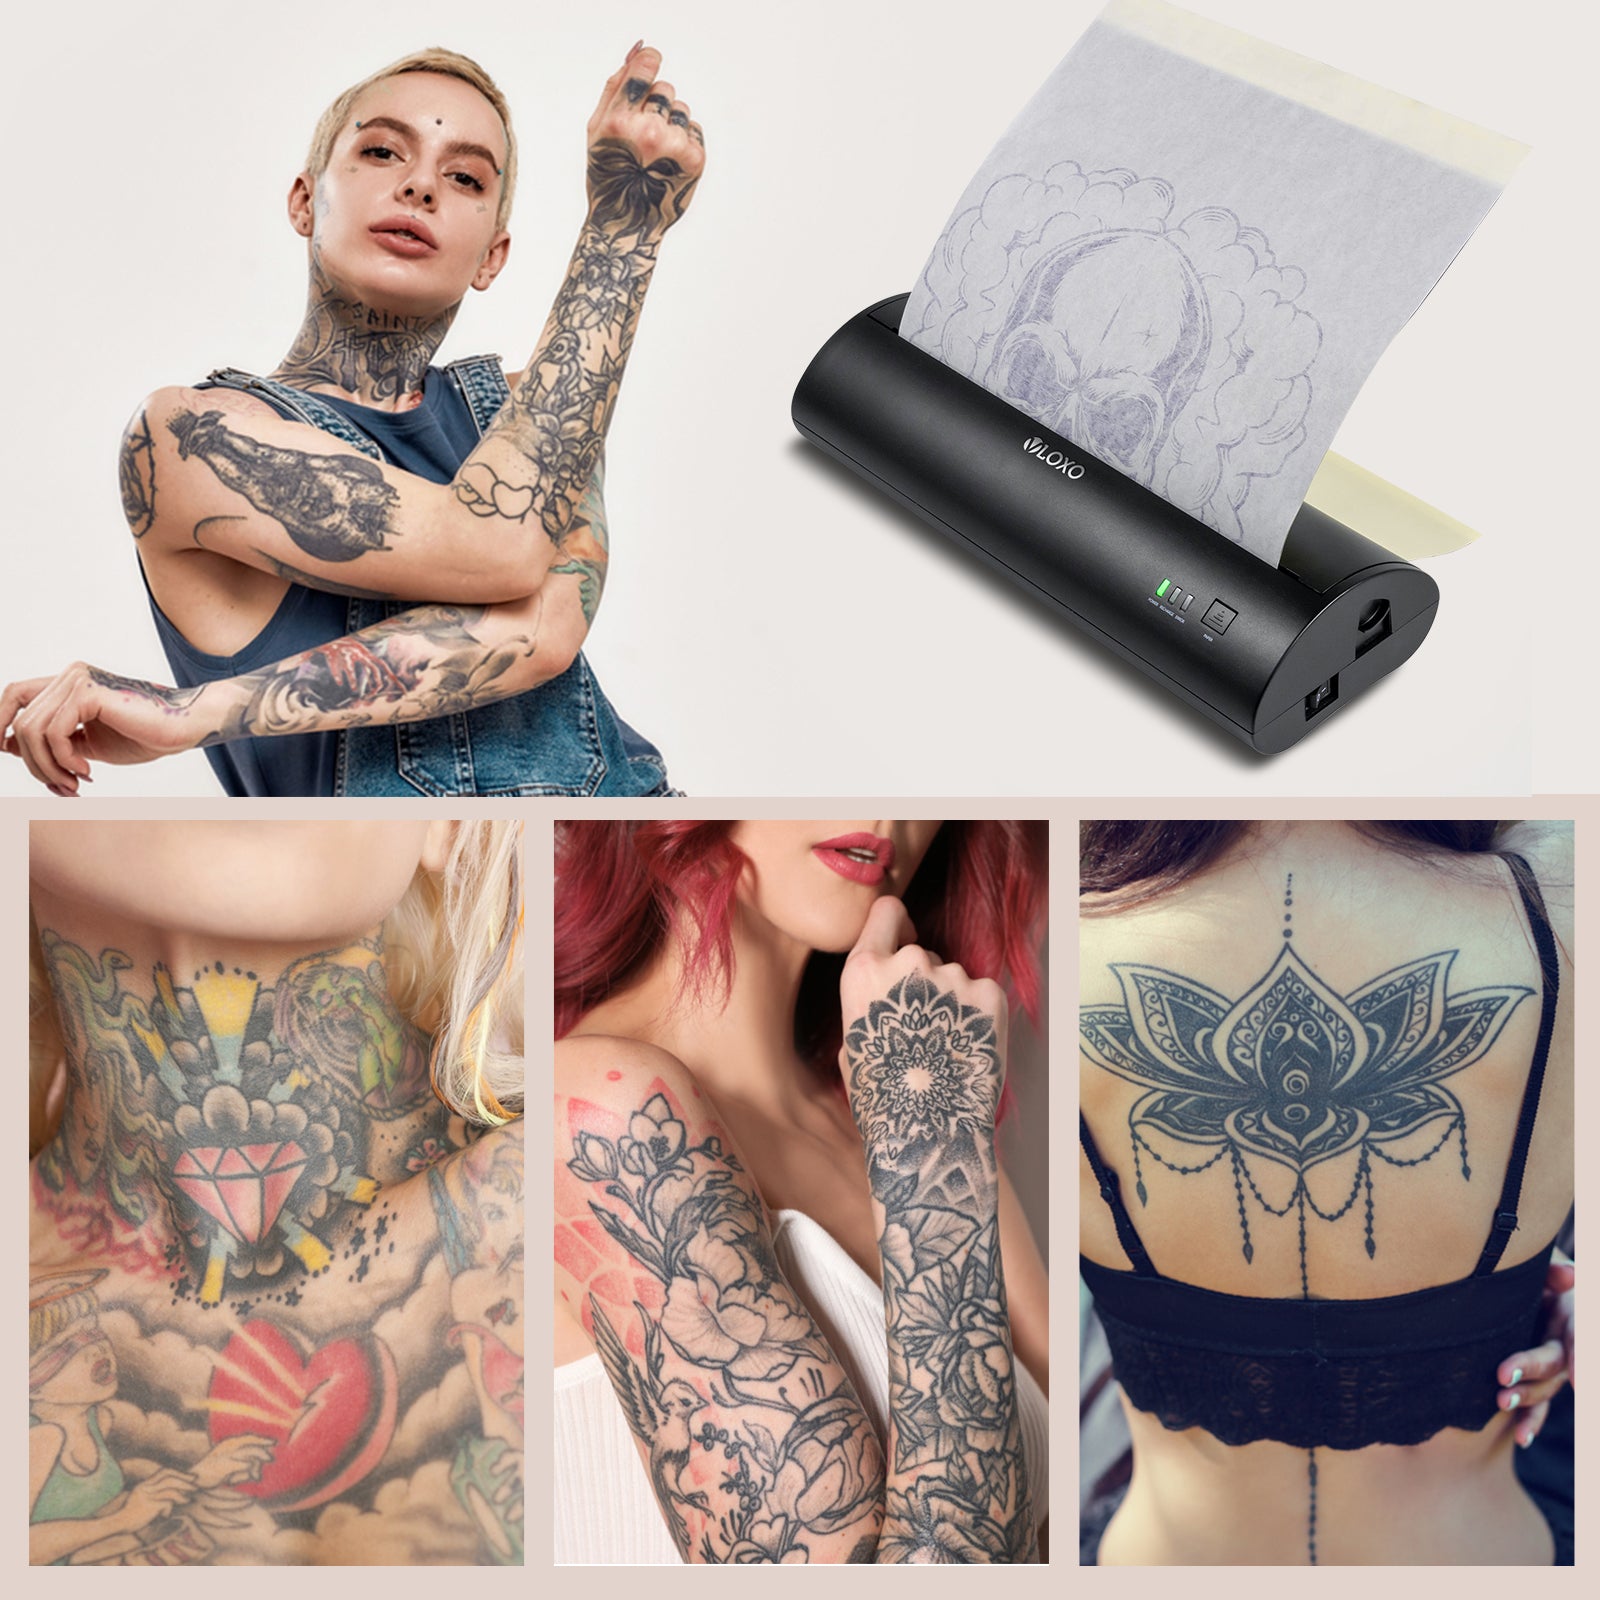 Thermal Tattoo Printer With Stencil Portable Printer For Laptop And Line  Printing 231129 From Zhi07, $138.38